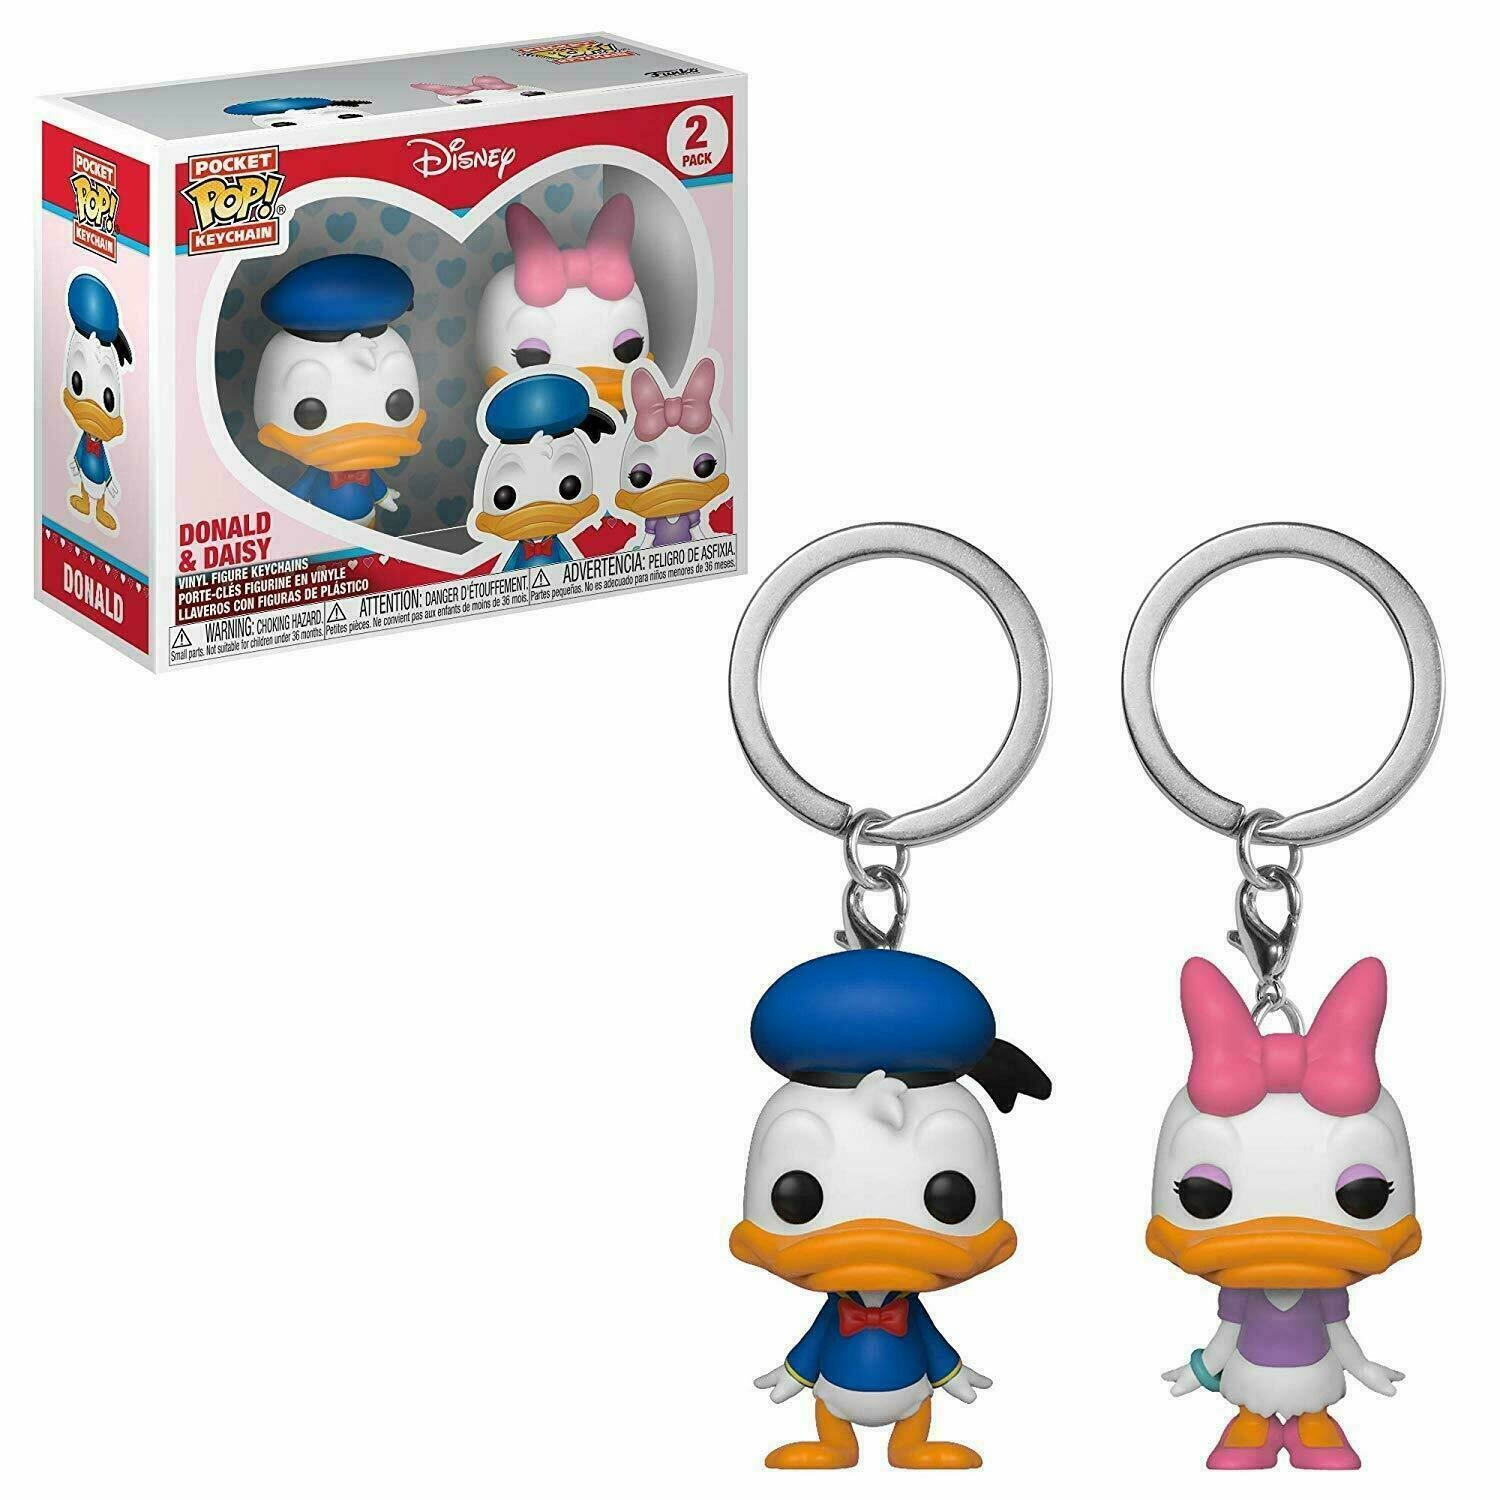 Funko Pop! Keychain: Donald & Daisy 2 Pack Toy, Multicolor